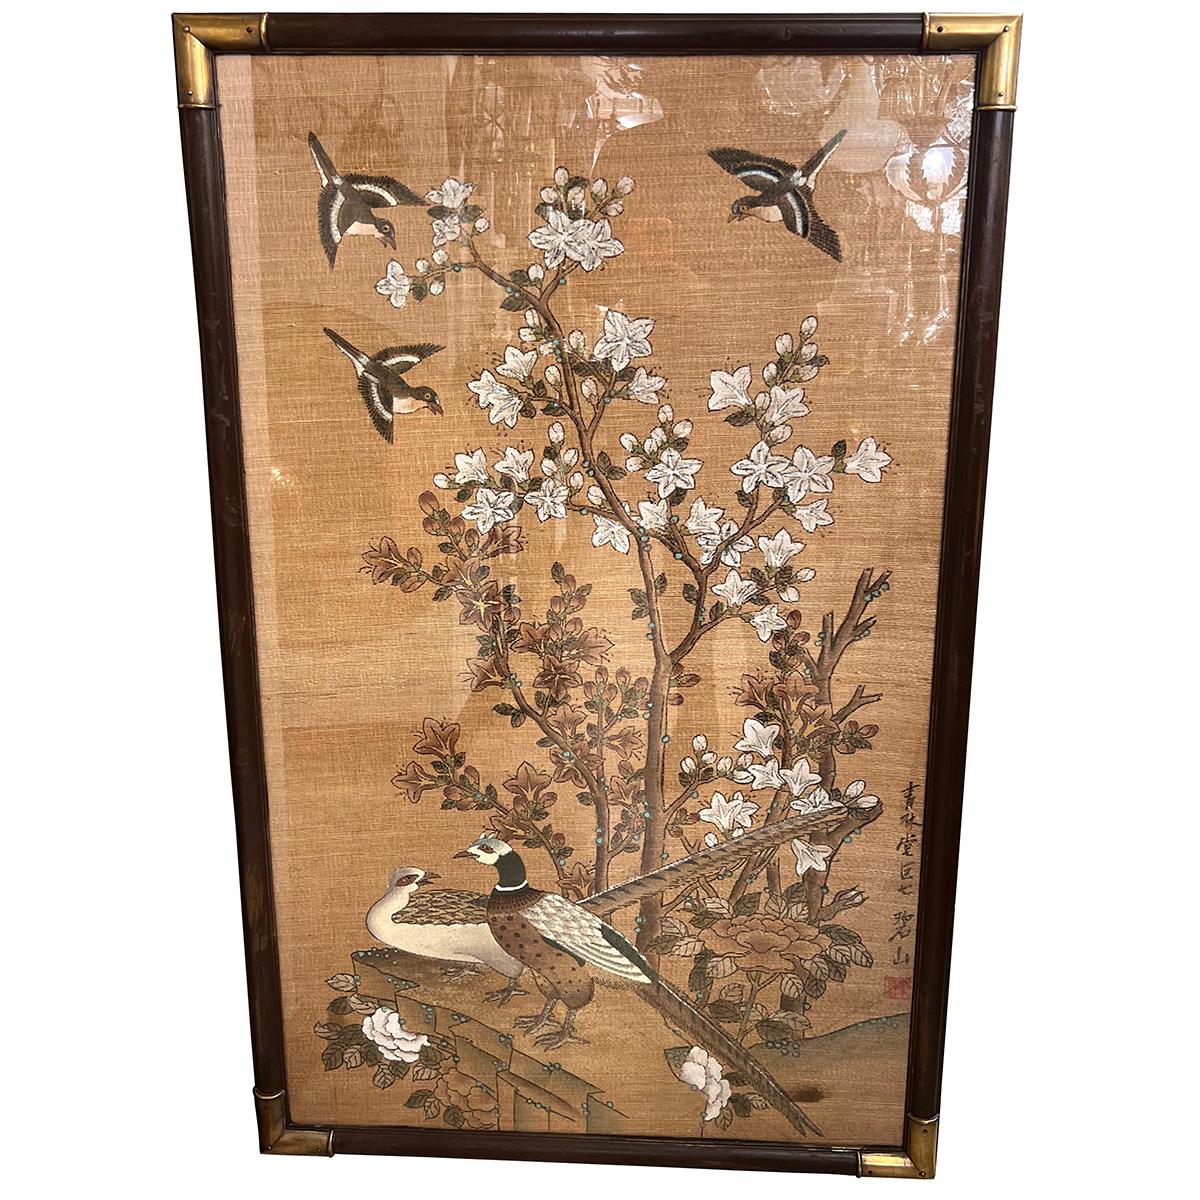 Pair of 1960s painted panels depicting trees and birds.

Measurements:
Height: 44